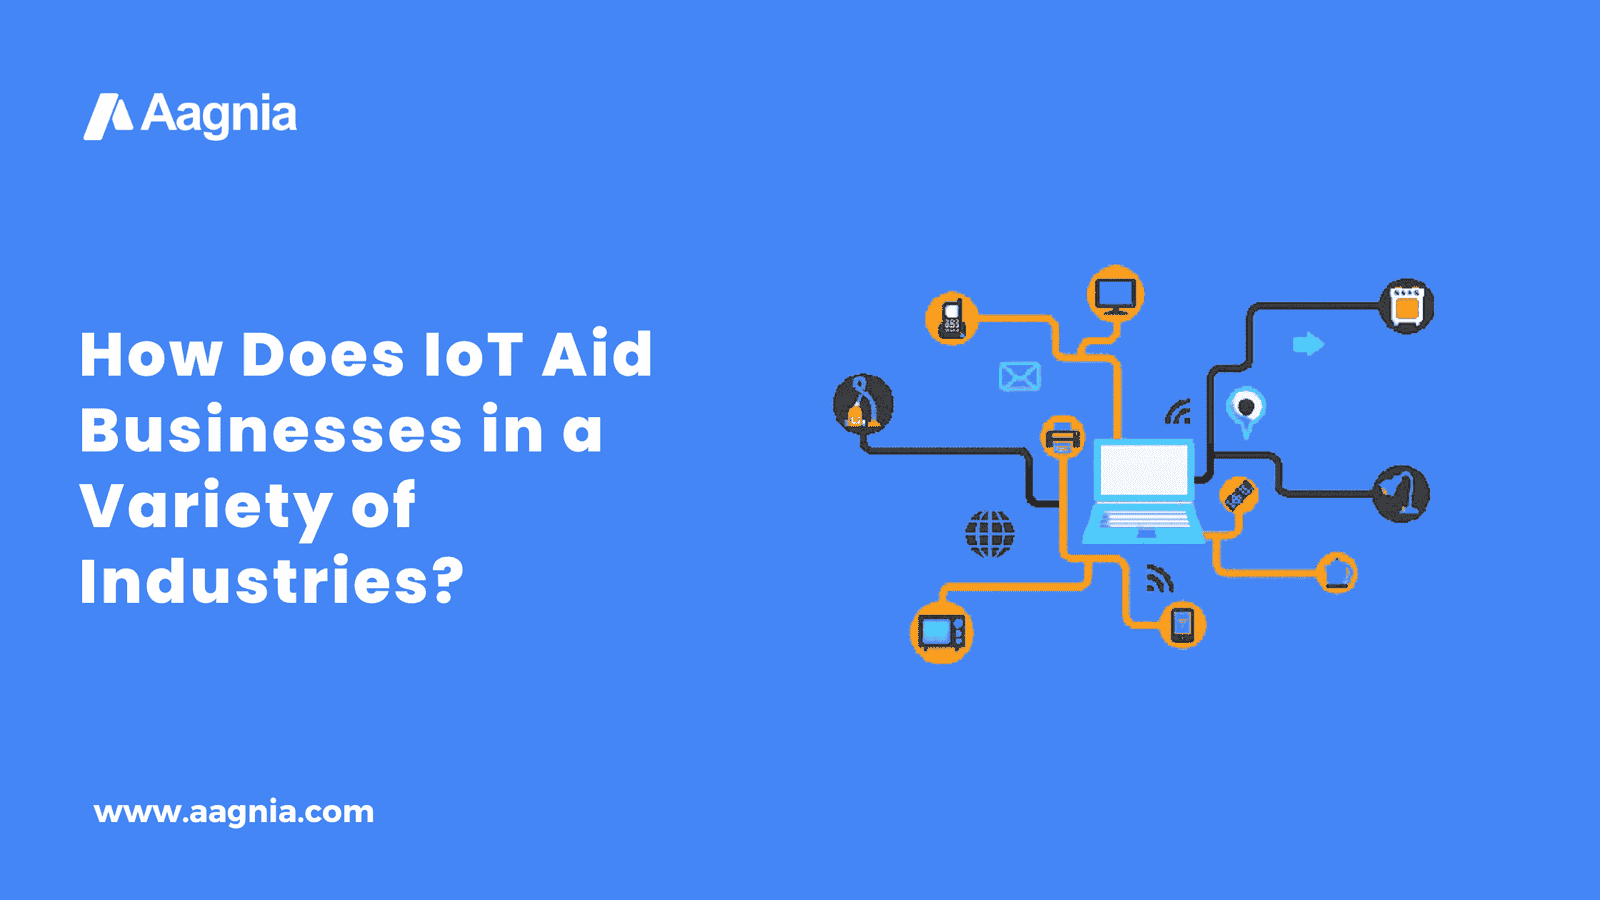 How Does IoT Aid Businesses in a Variety of Industries